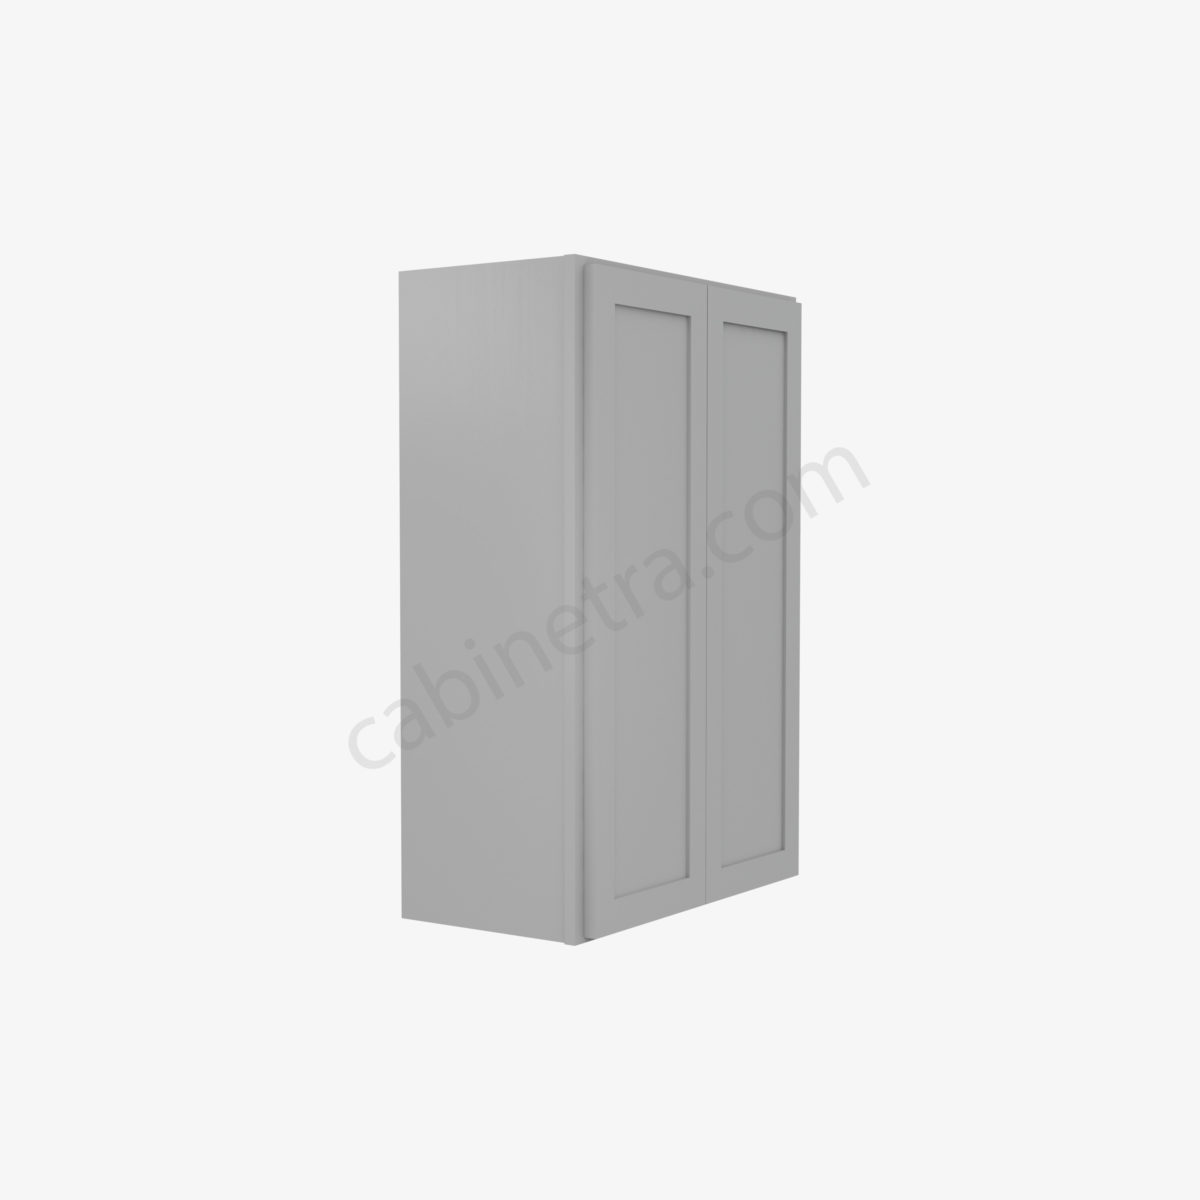 AB W2436B 4 Forevermark Lait Gray Shaker Cabinetra scaled